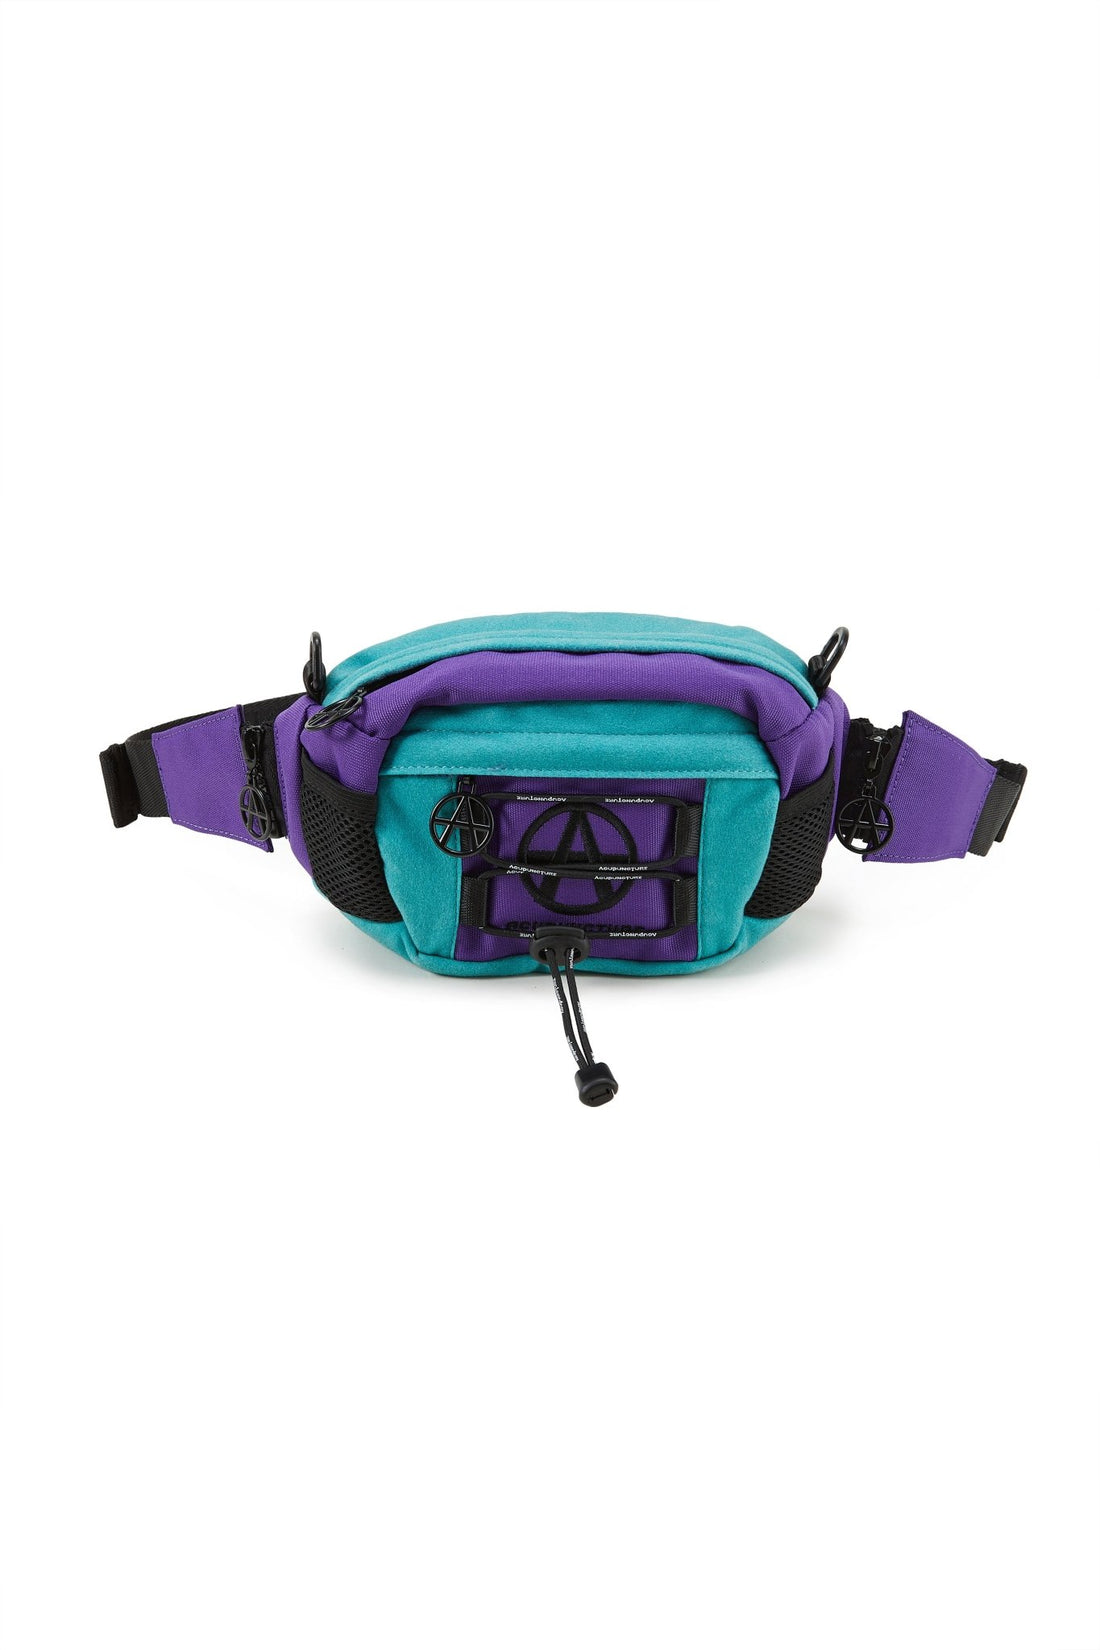 ACU FANNY PACK GREEN-VIOLET Acupuncture